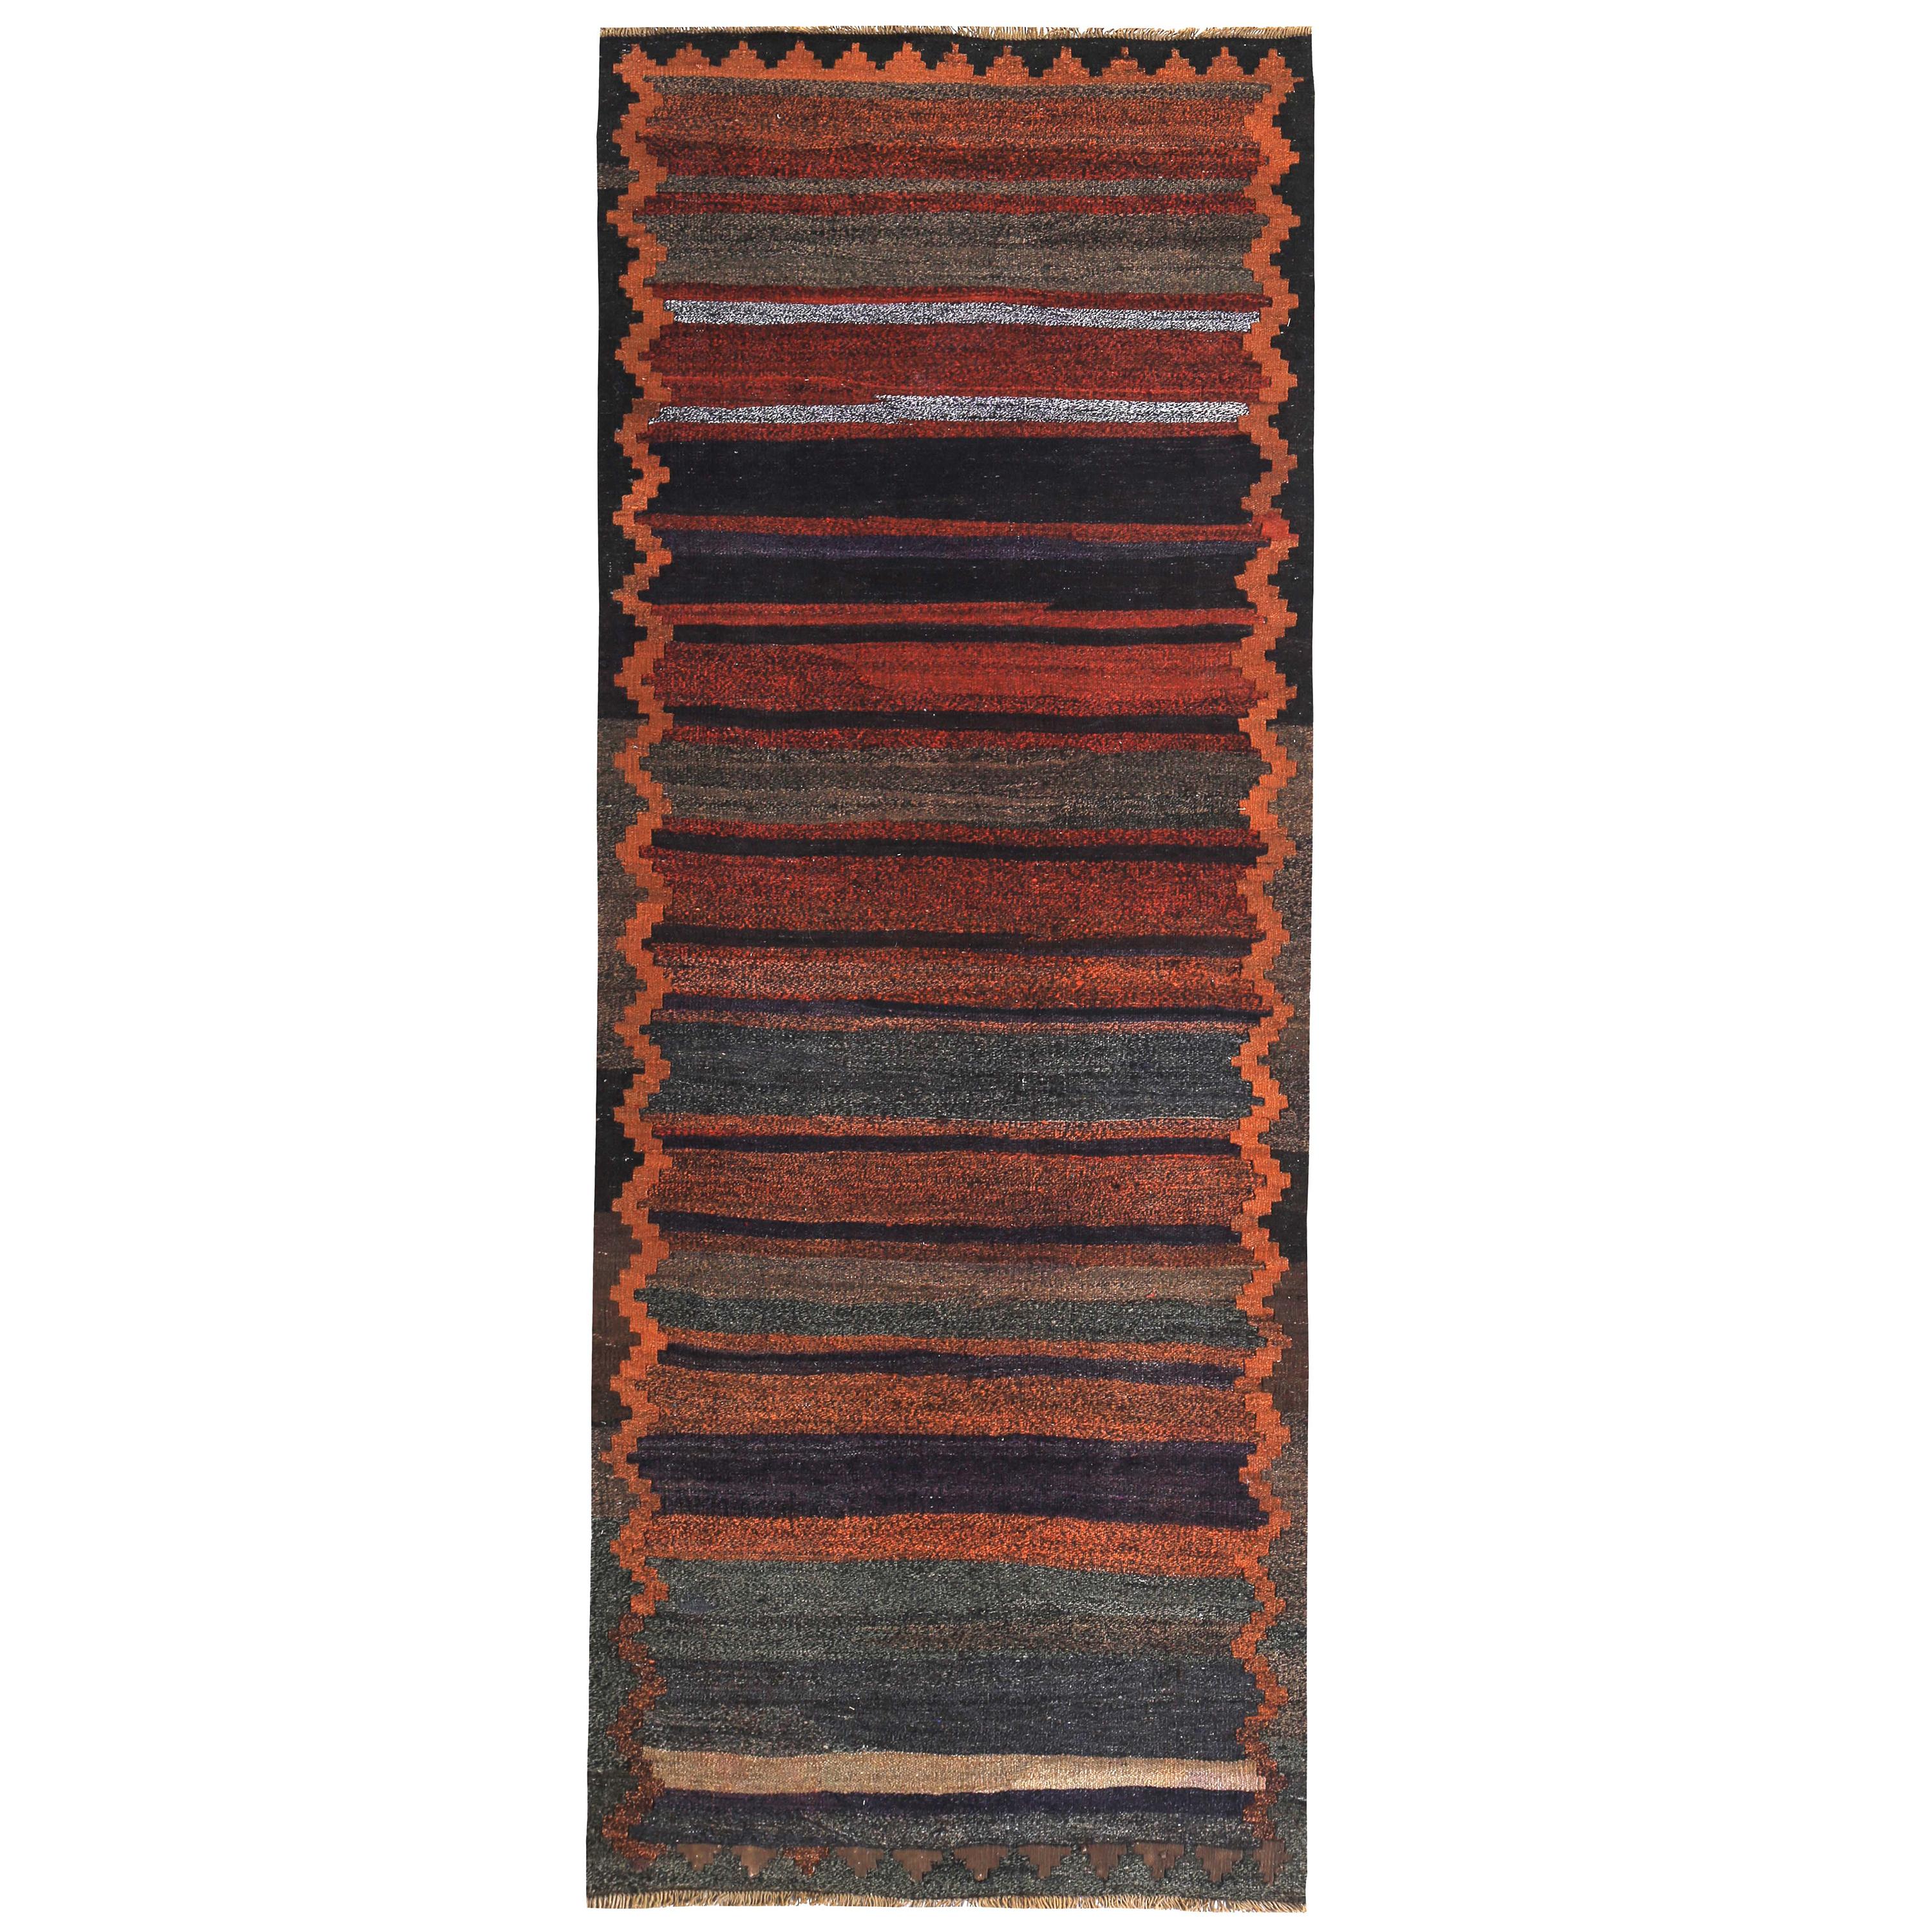 Turkish Kilim Runner Rug with Orange, Navy and Red Stripes with Tribal Design